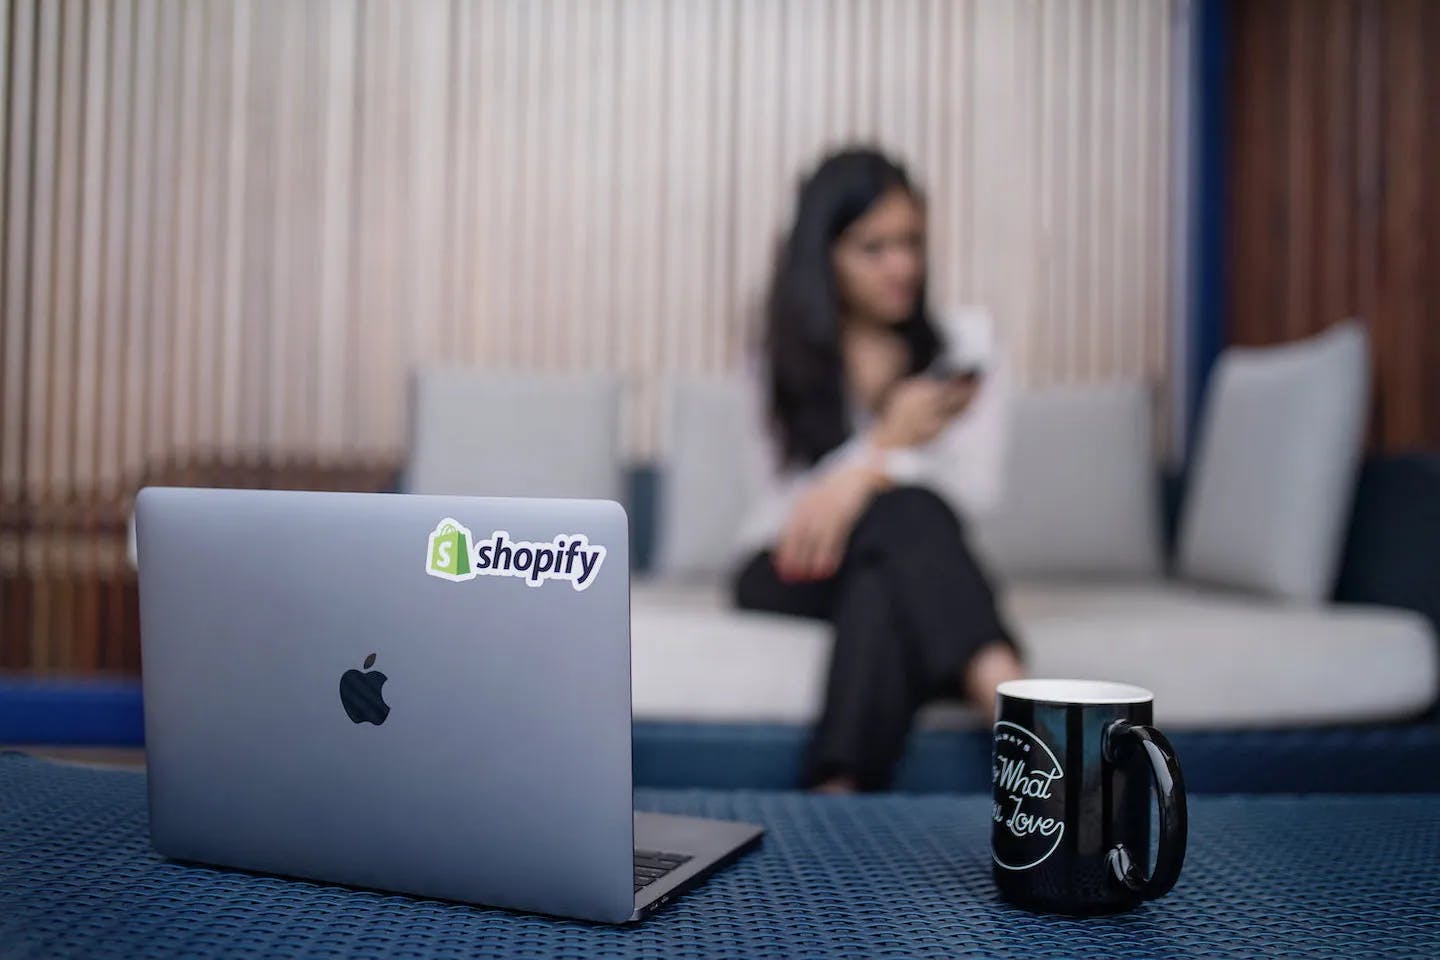 MacBook with Shopify logo and entrepreneur in background